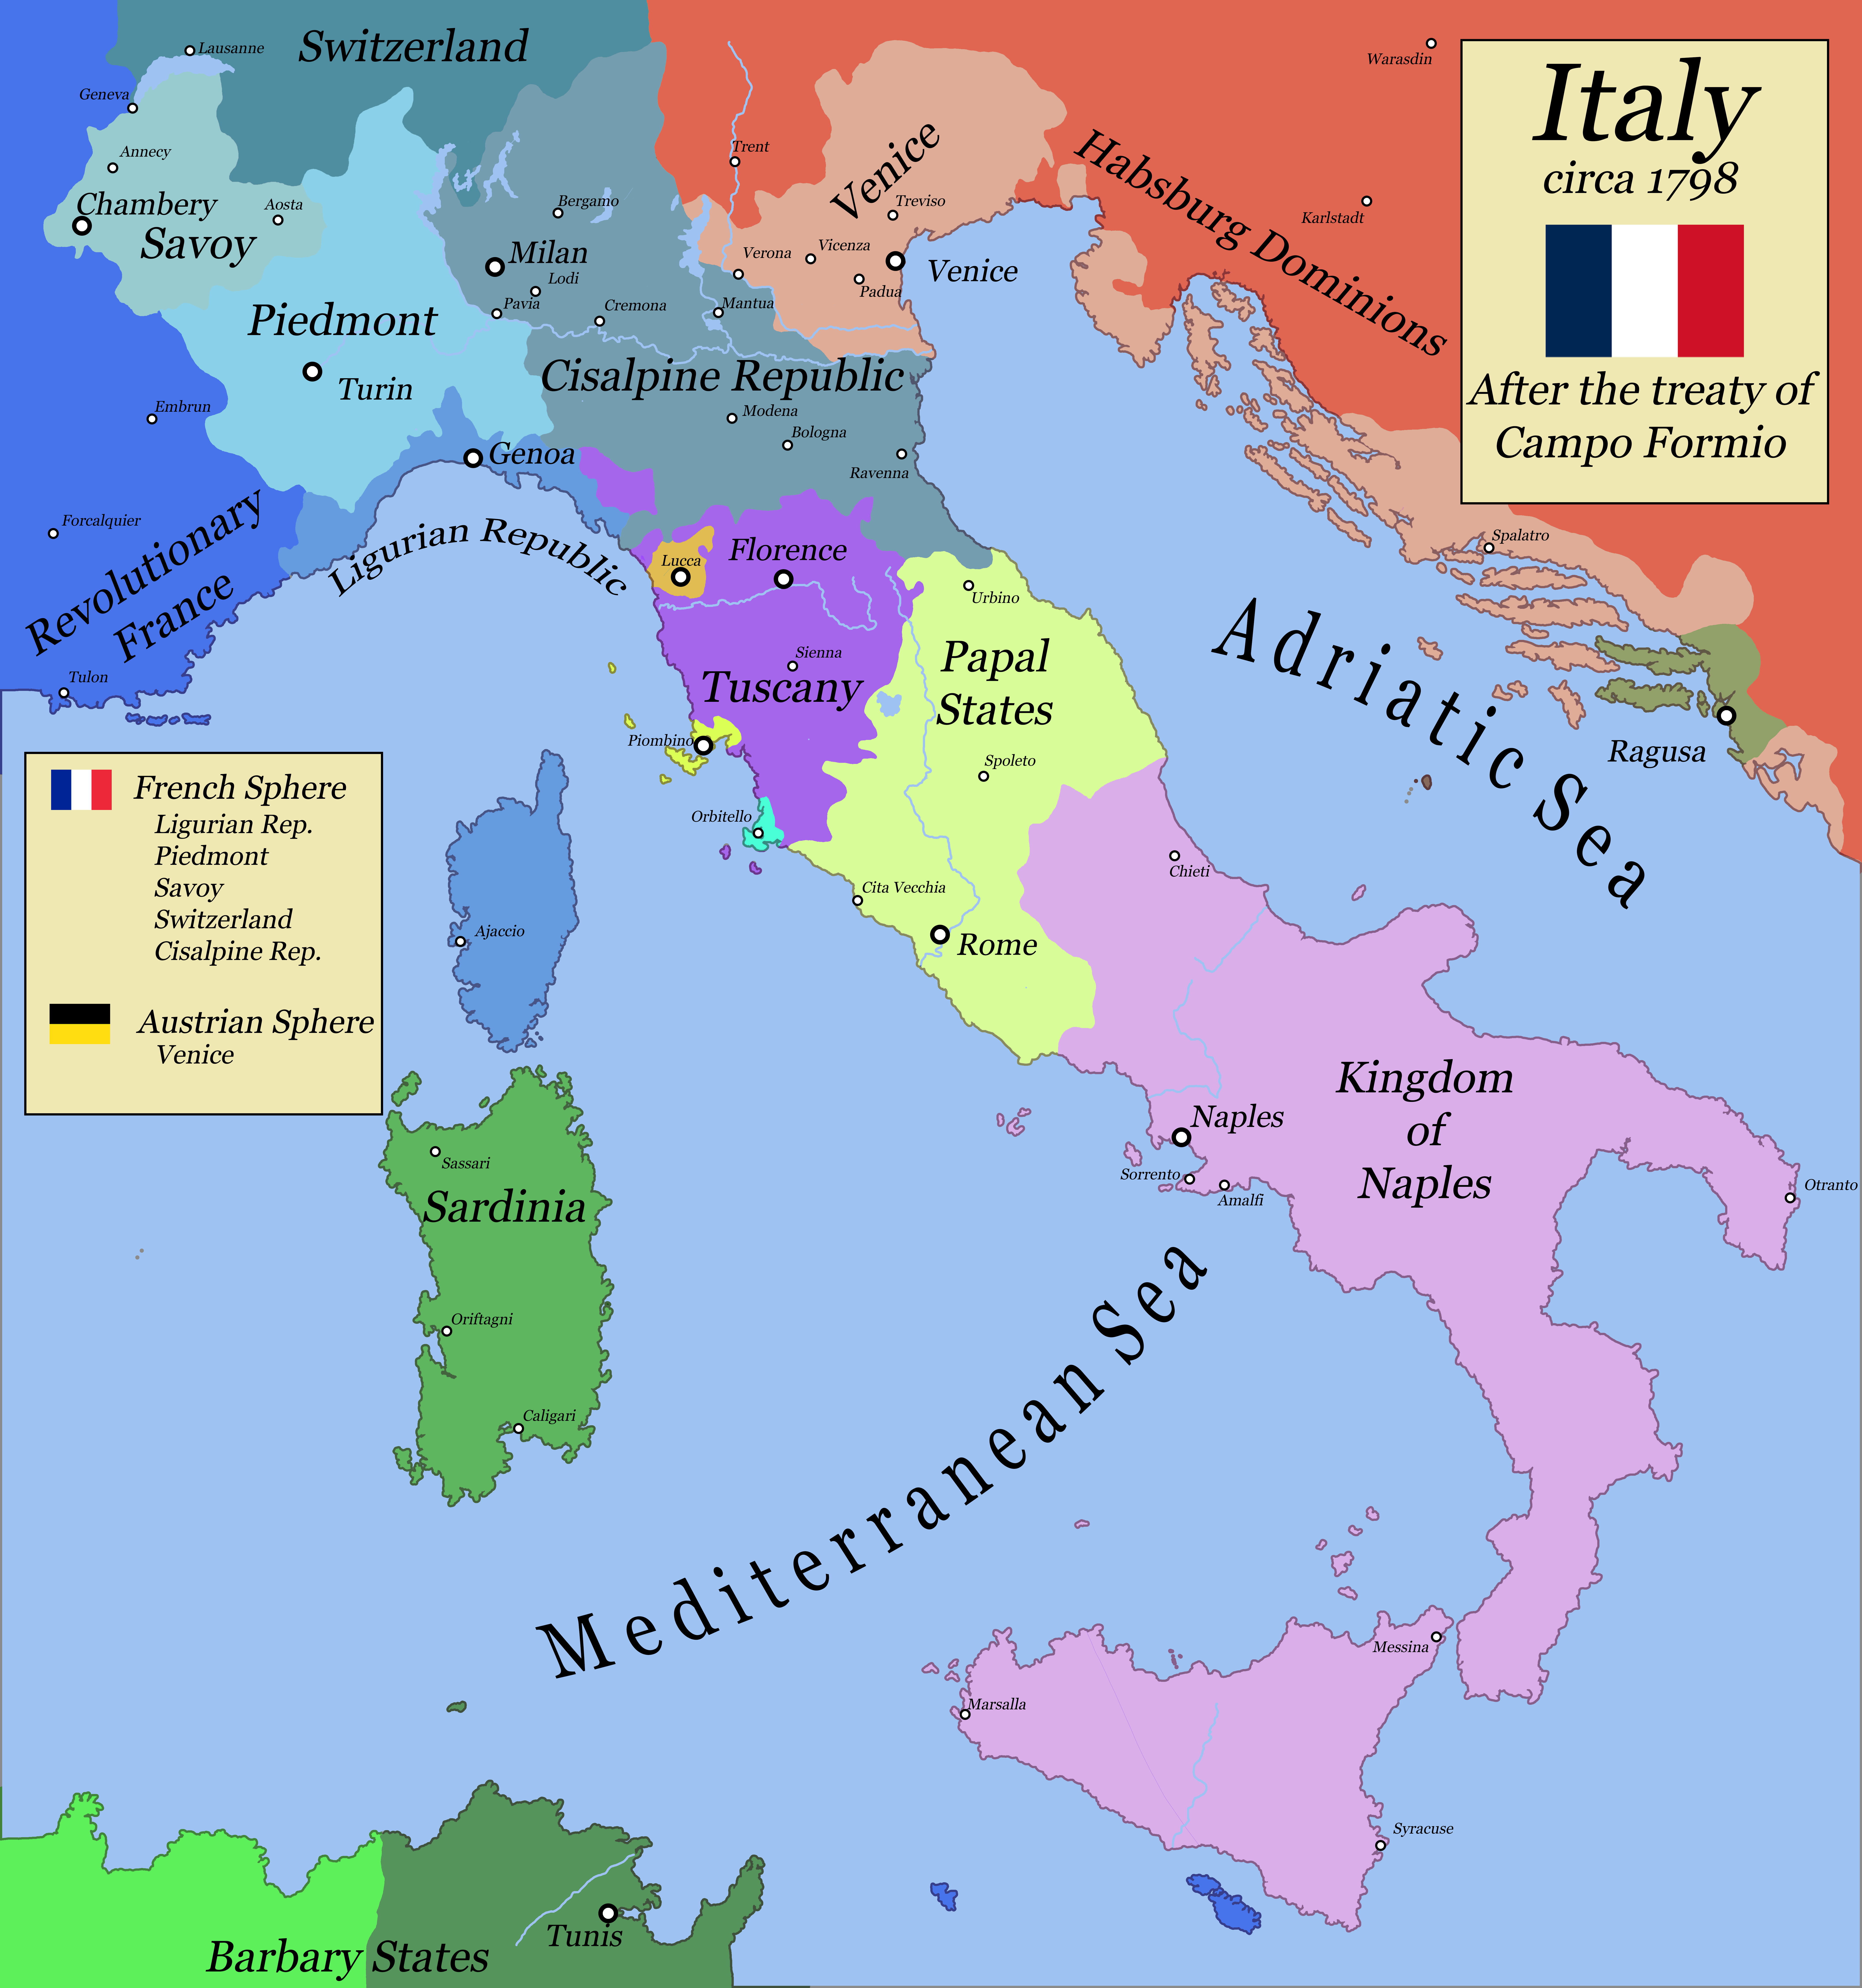 Italian campaigns of the French Revolutionary Wars